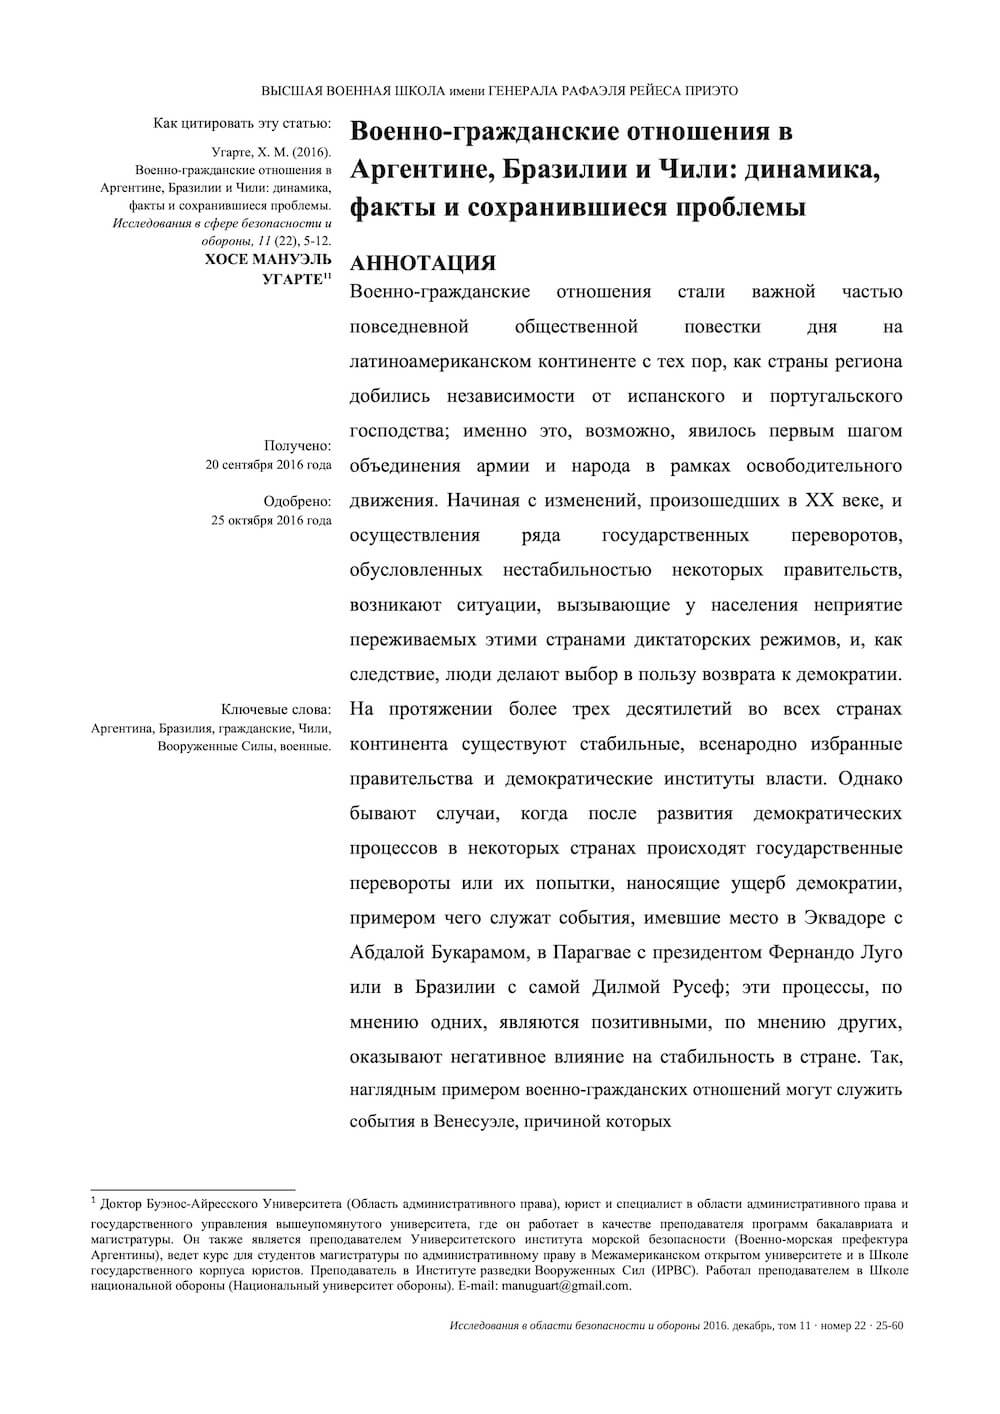 The first page of a scientific article in Spanish translated into Russian